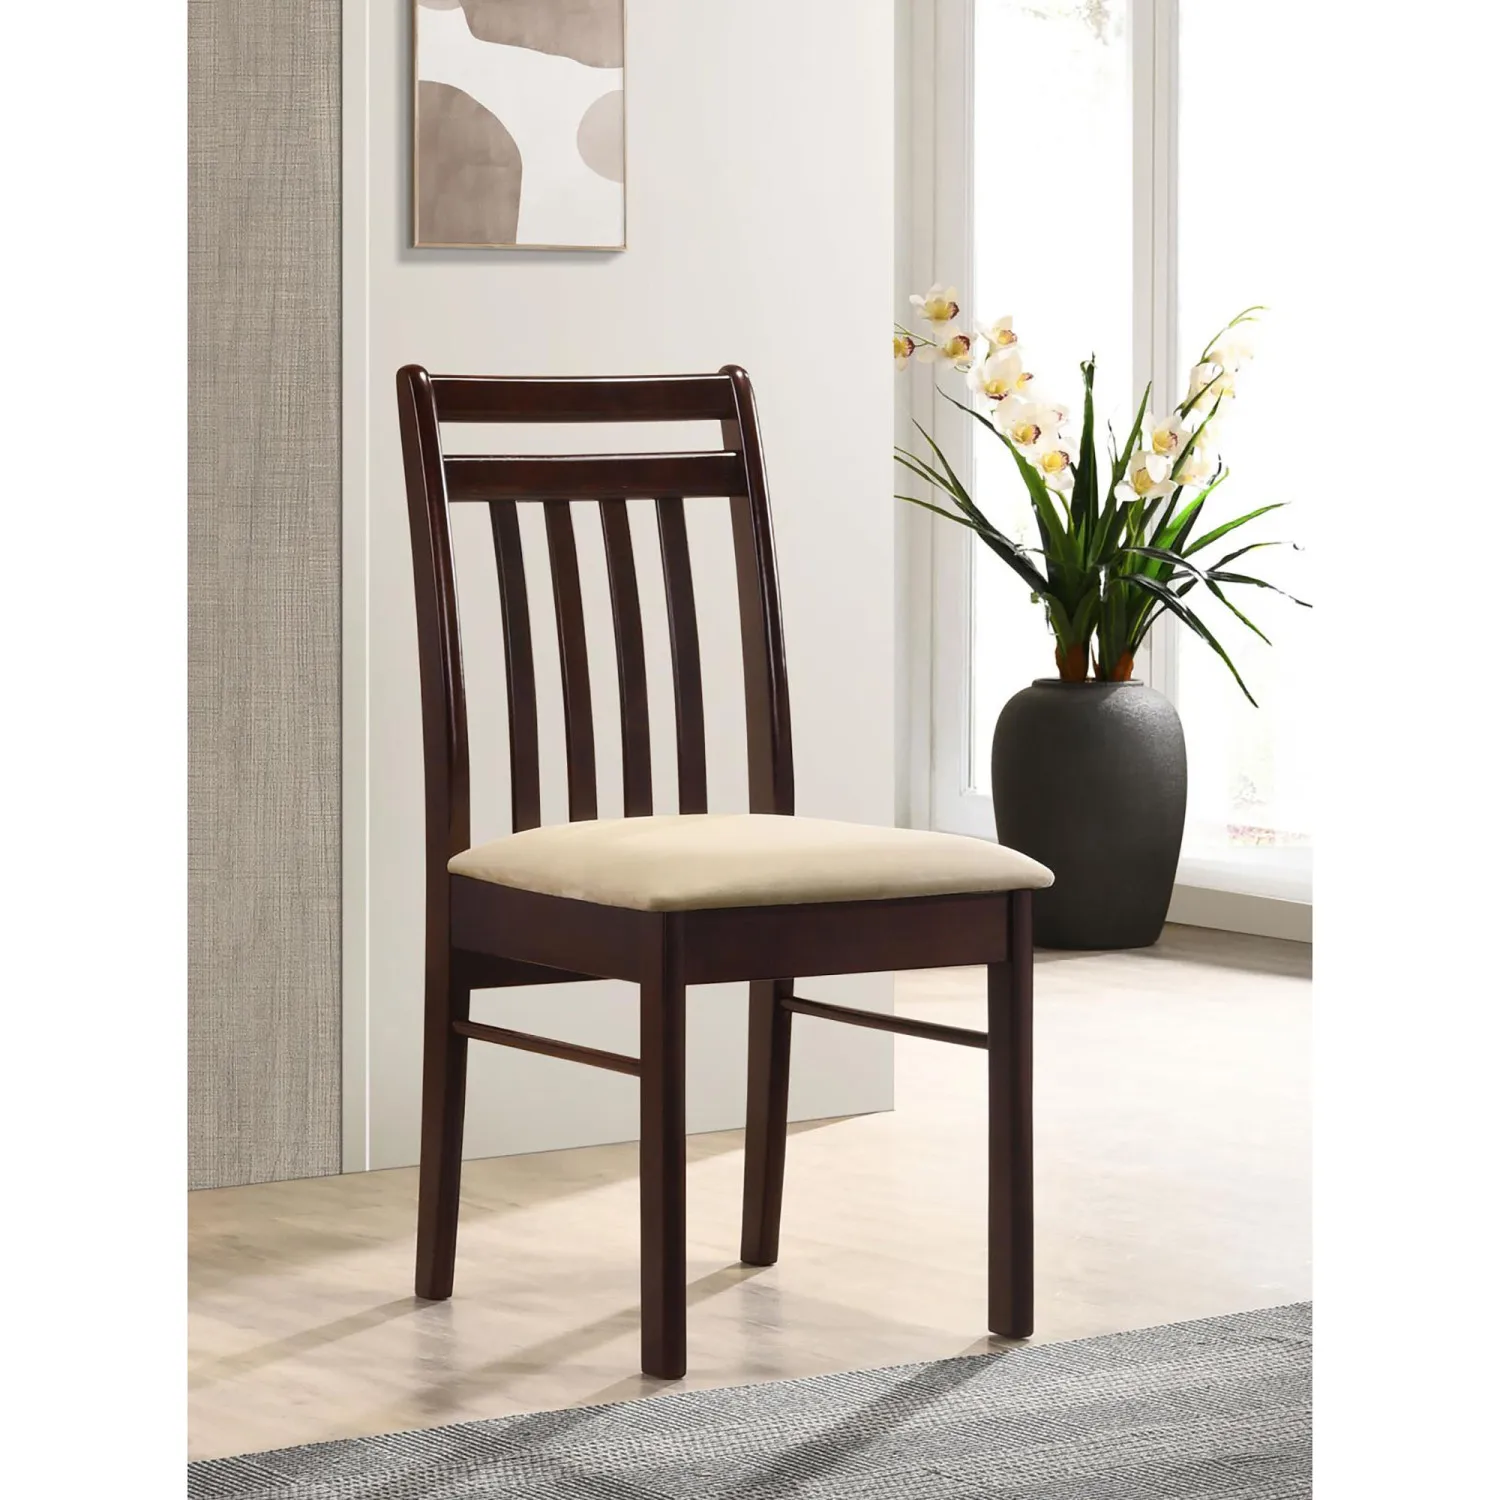 

Elegant Light Brown and Cappuccino Slat Back Desk Chair for Stylish Comfort and Support in Home or Office Settings. desk